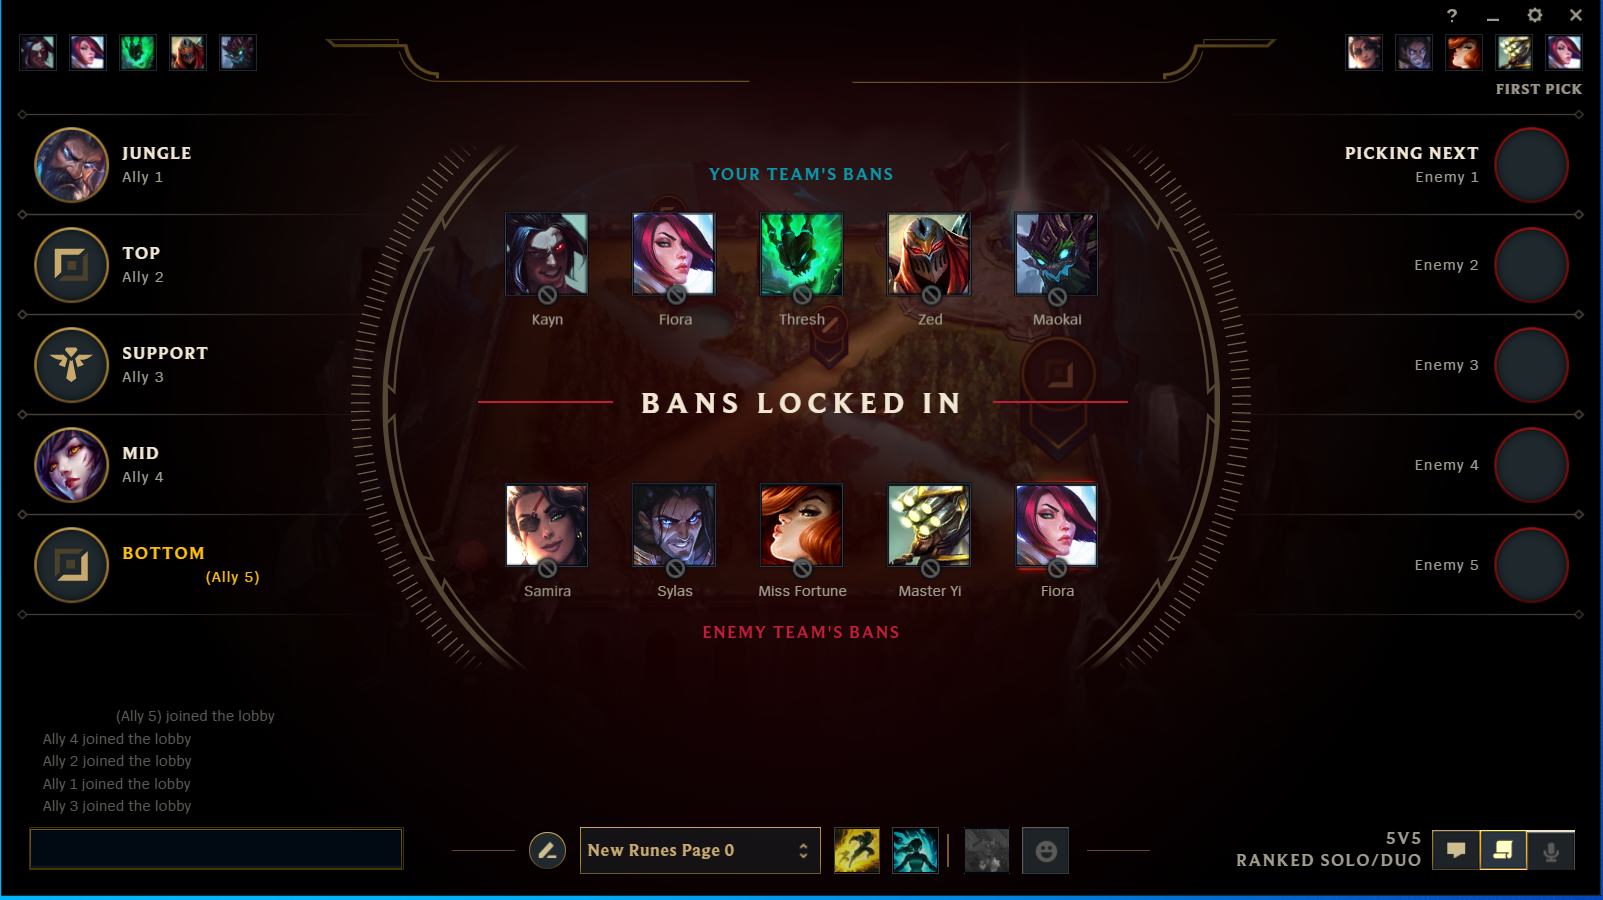 Champ Select: how to choose the right LoL champion for you